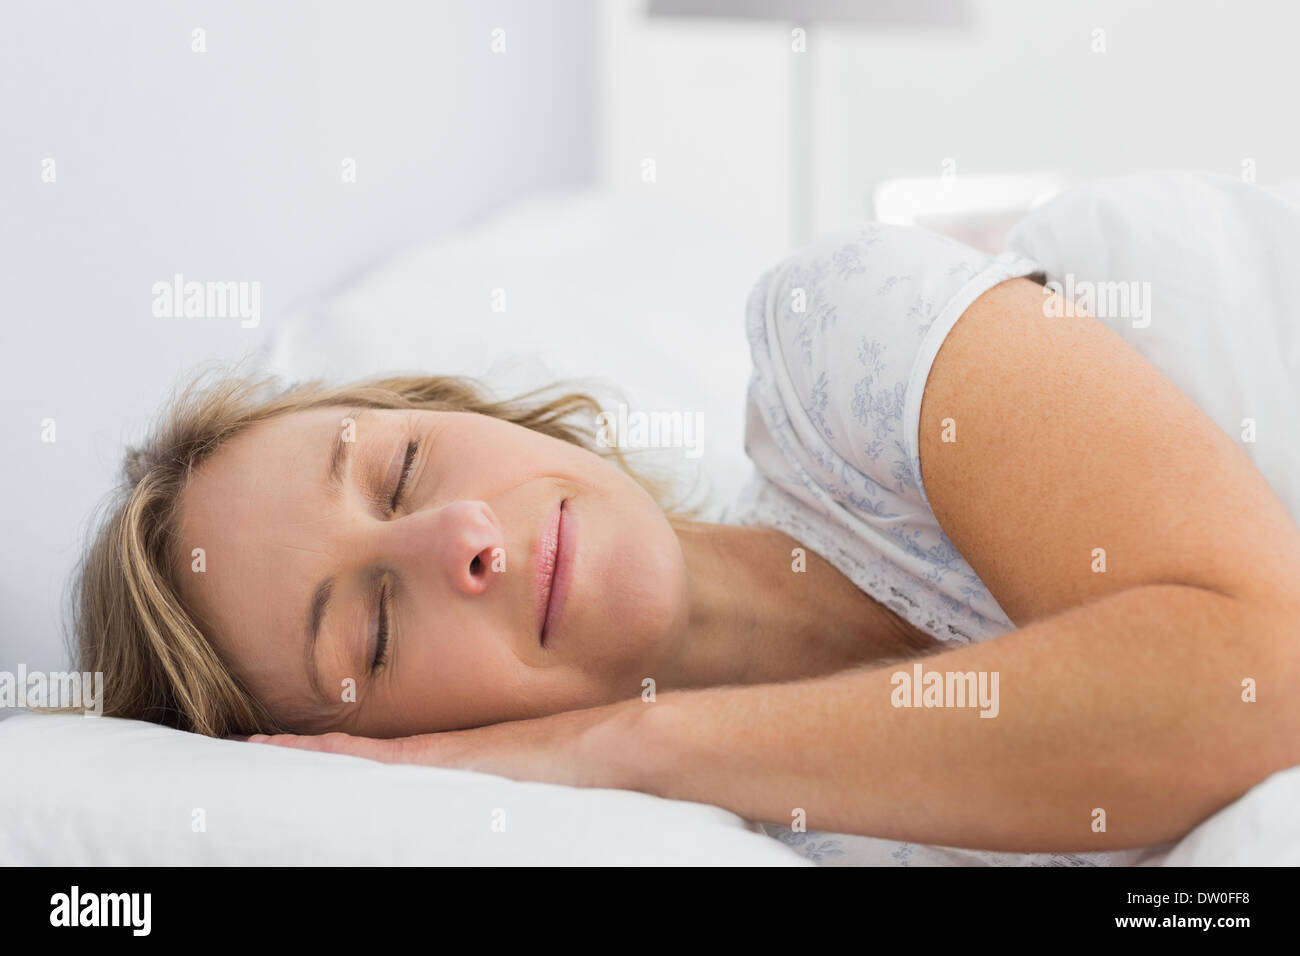 Peaceful blonde woman sleeping in bed Stock Photo